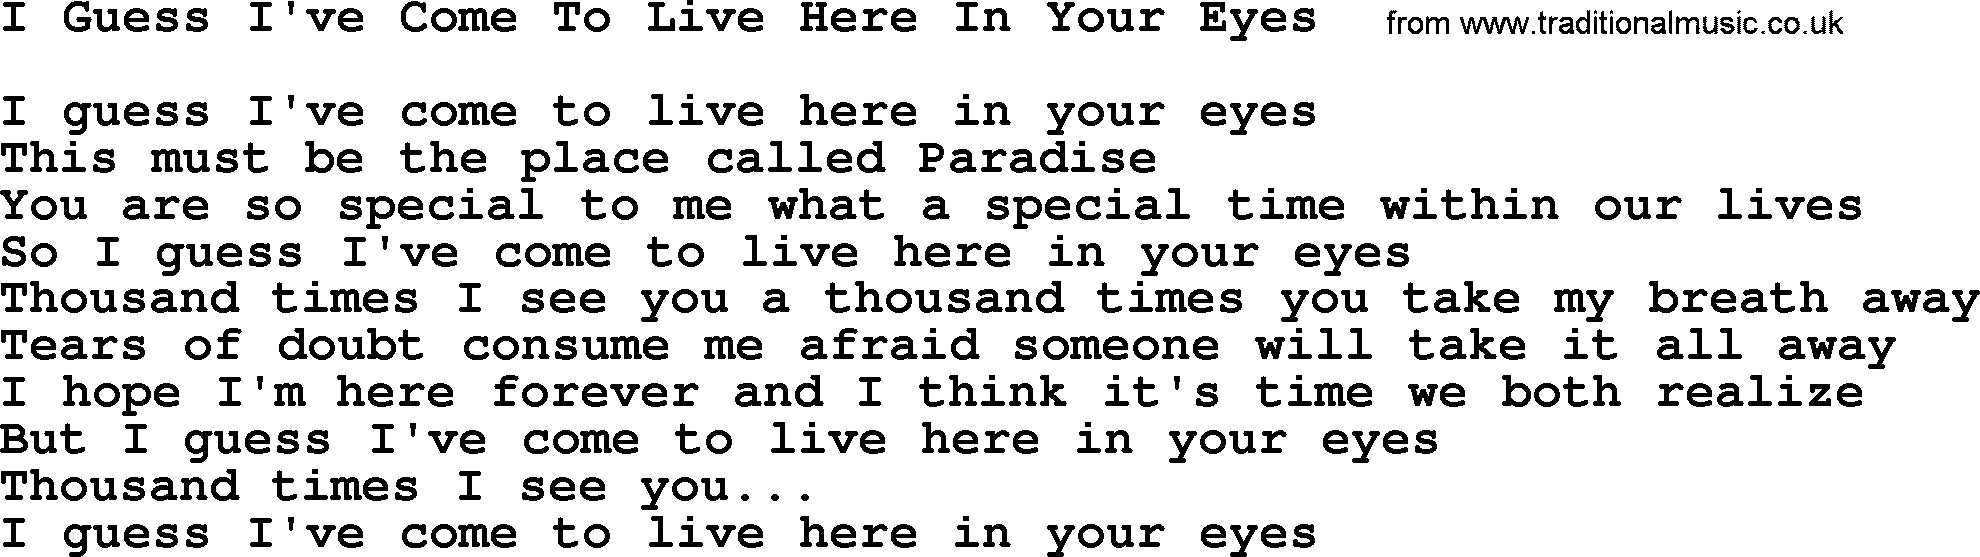 Willie Nelson song: I Guess I've Come To Live Here In Your Eyes lyrics